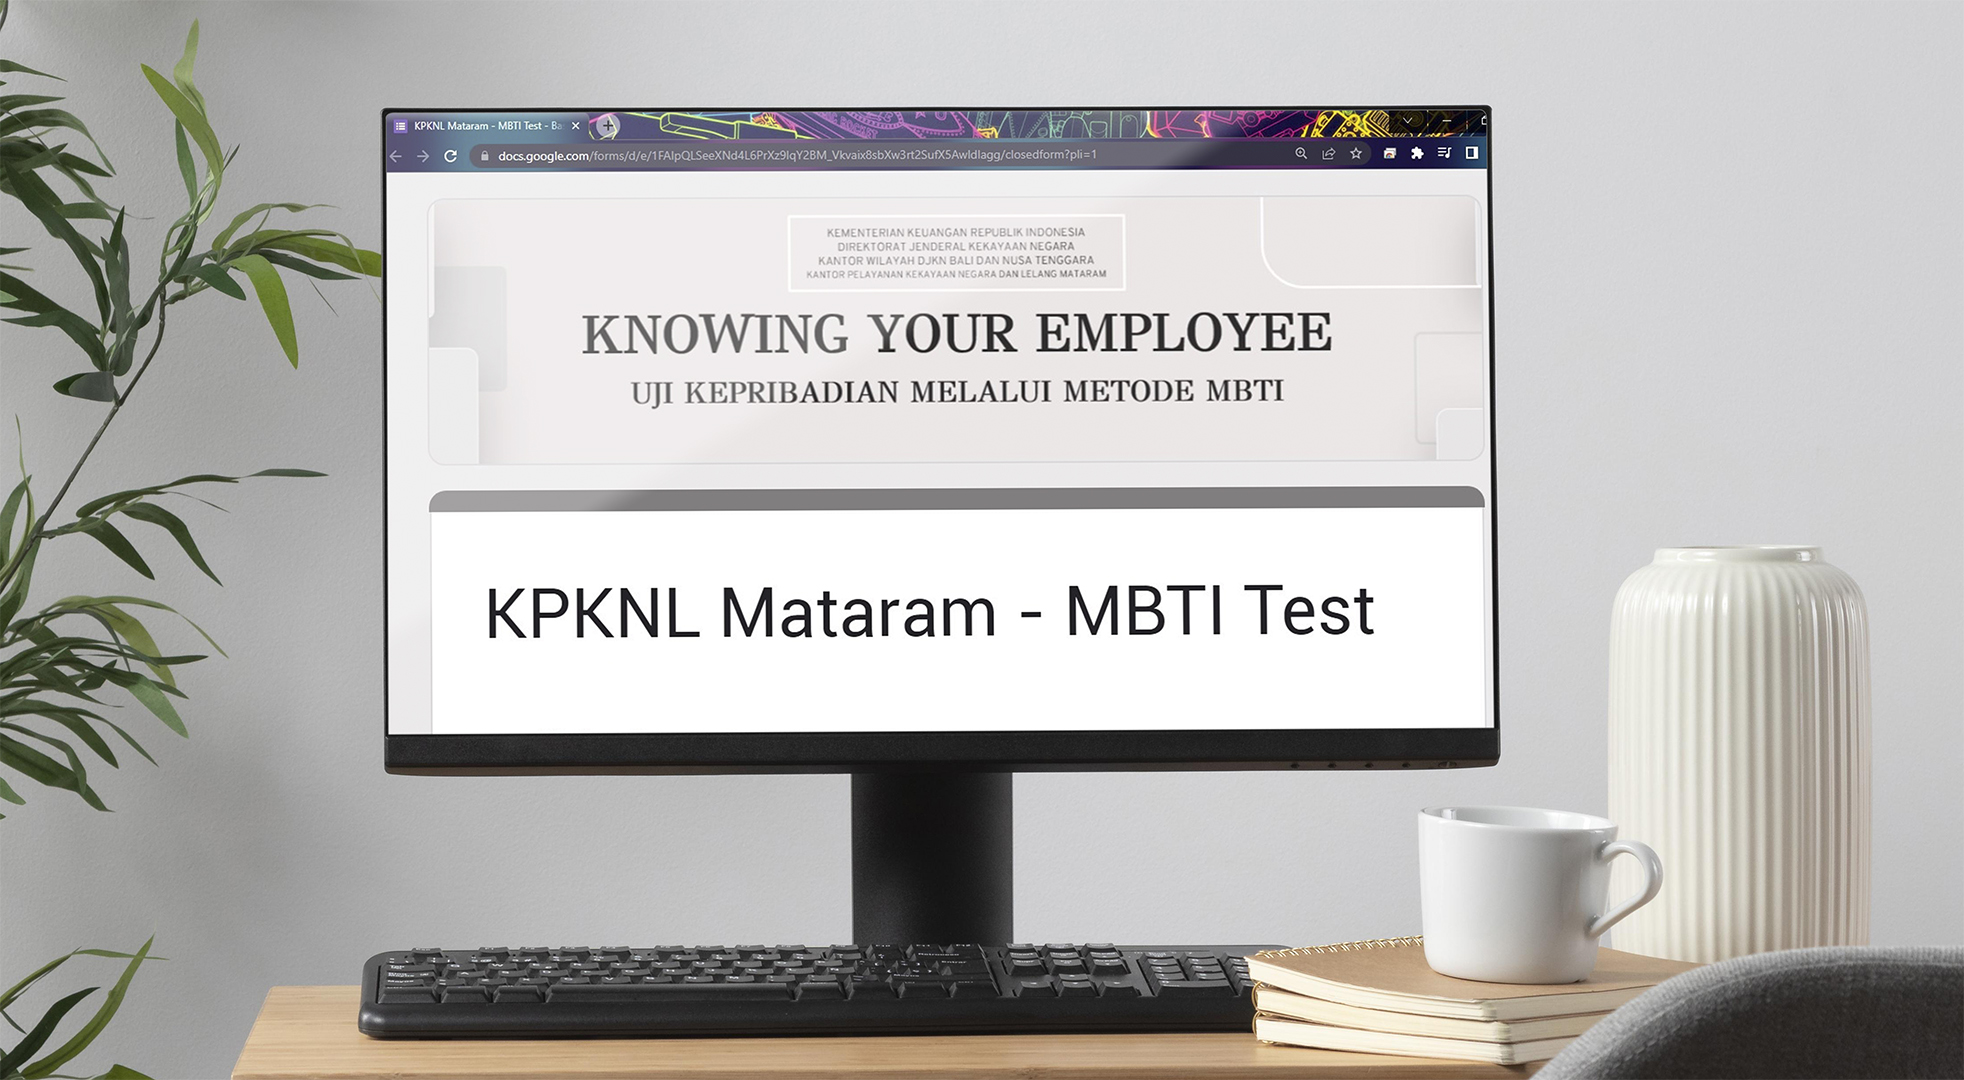 MBTI Test dalam Knowing Your Employee